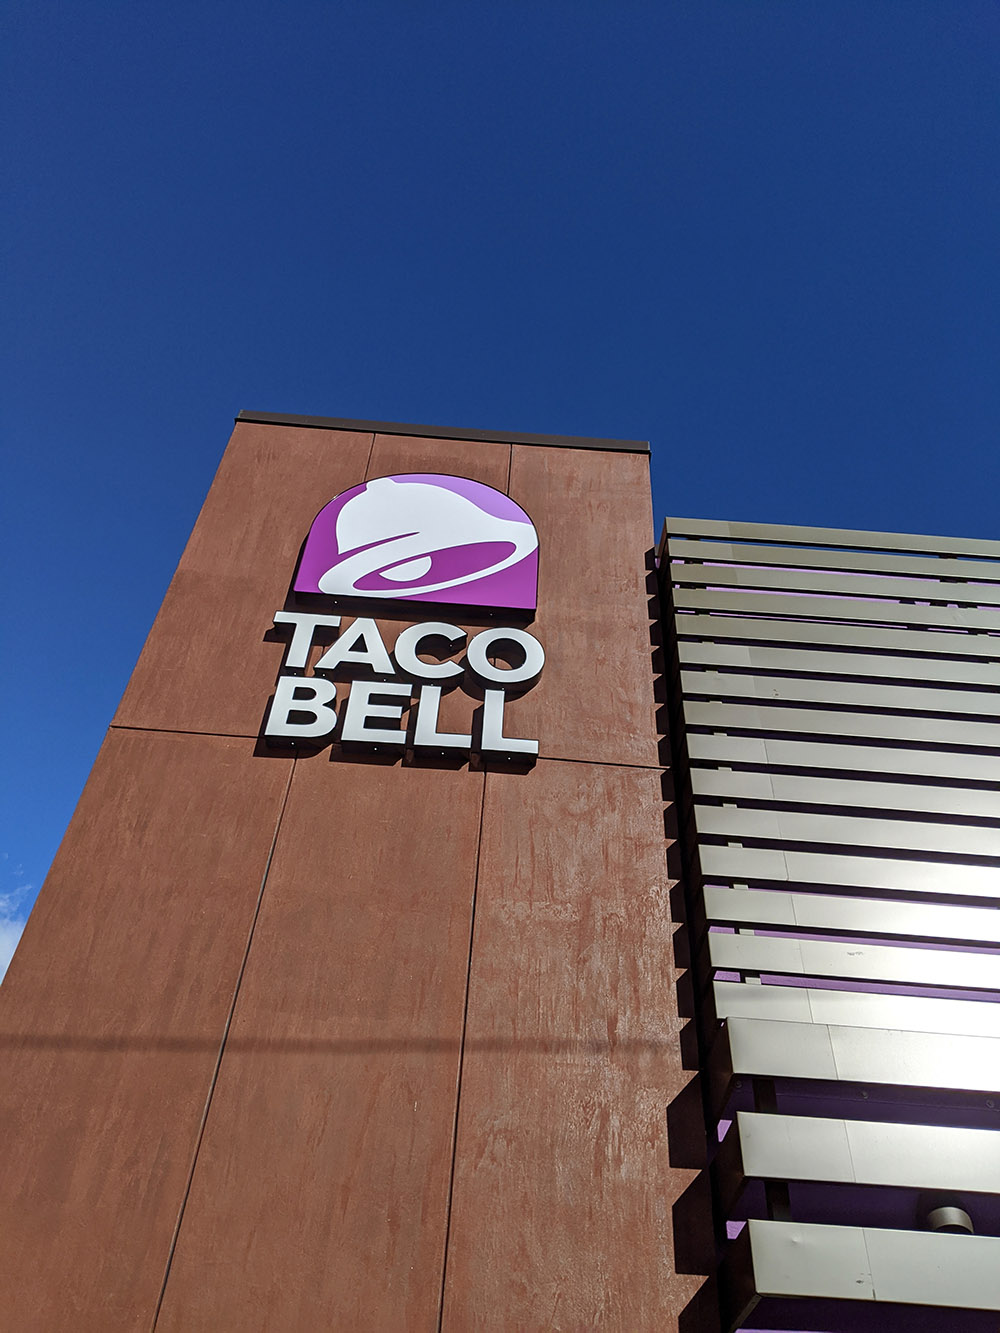 Taco Bell Restaurant Sign on side of building